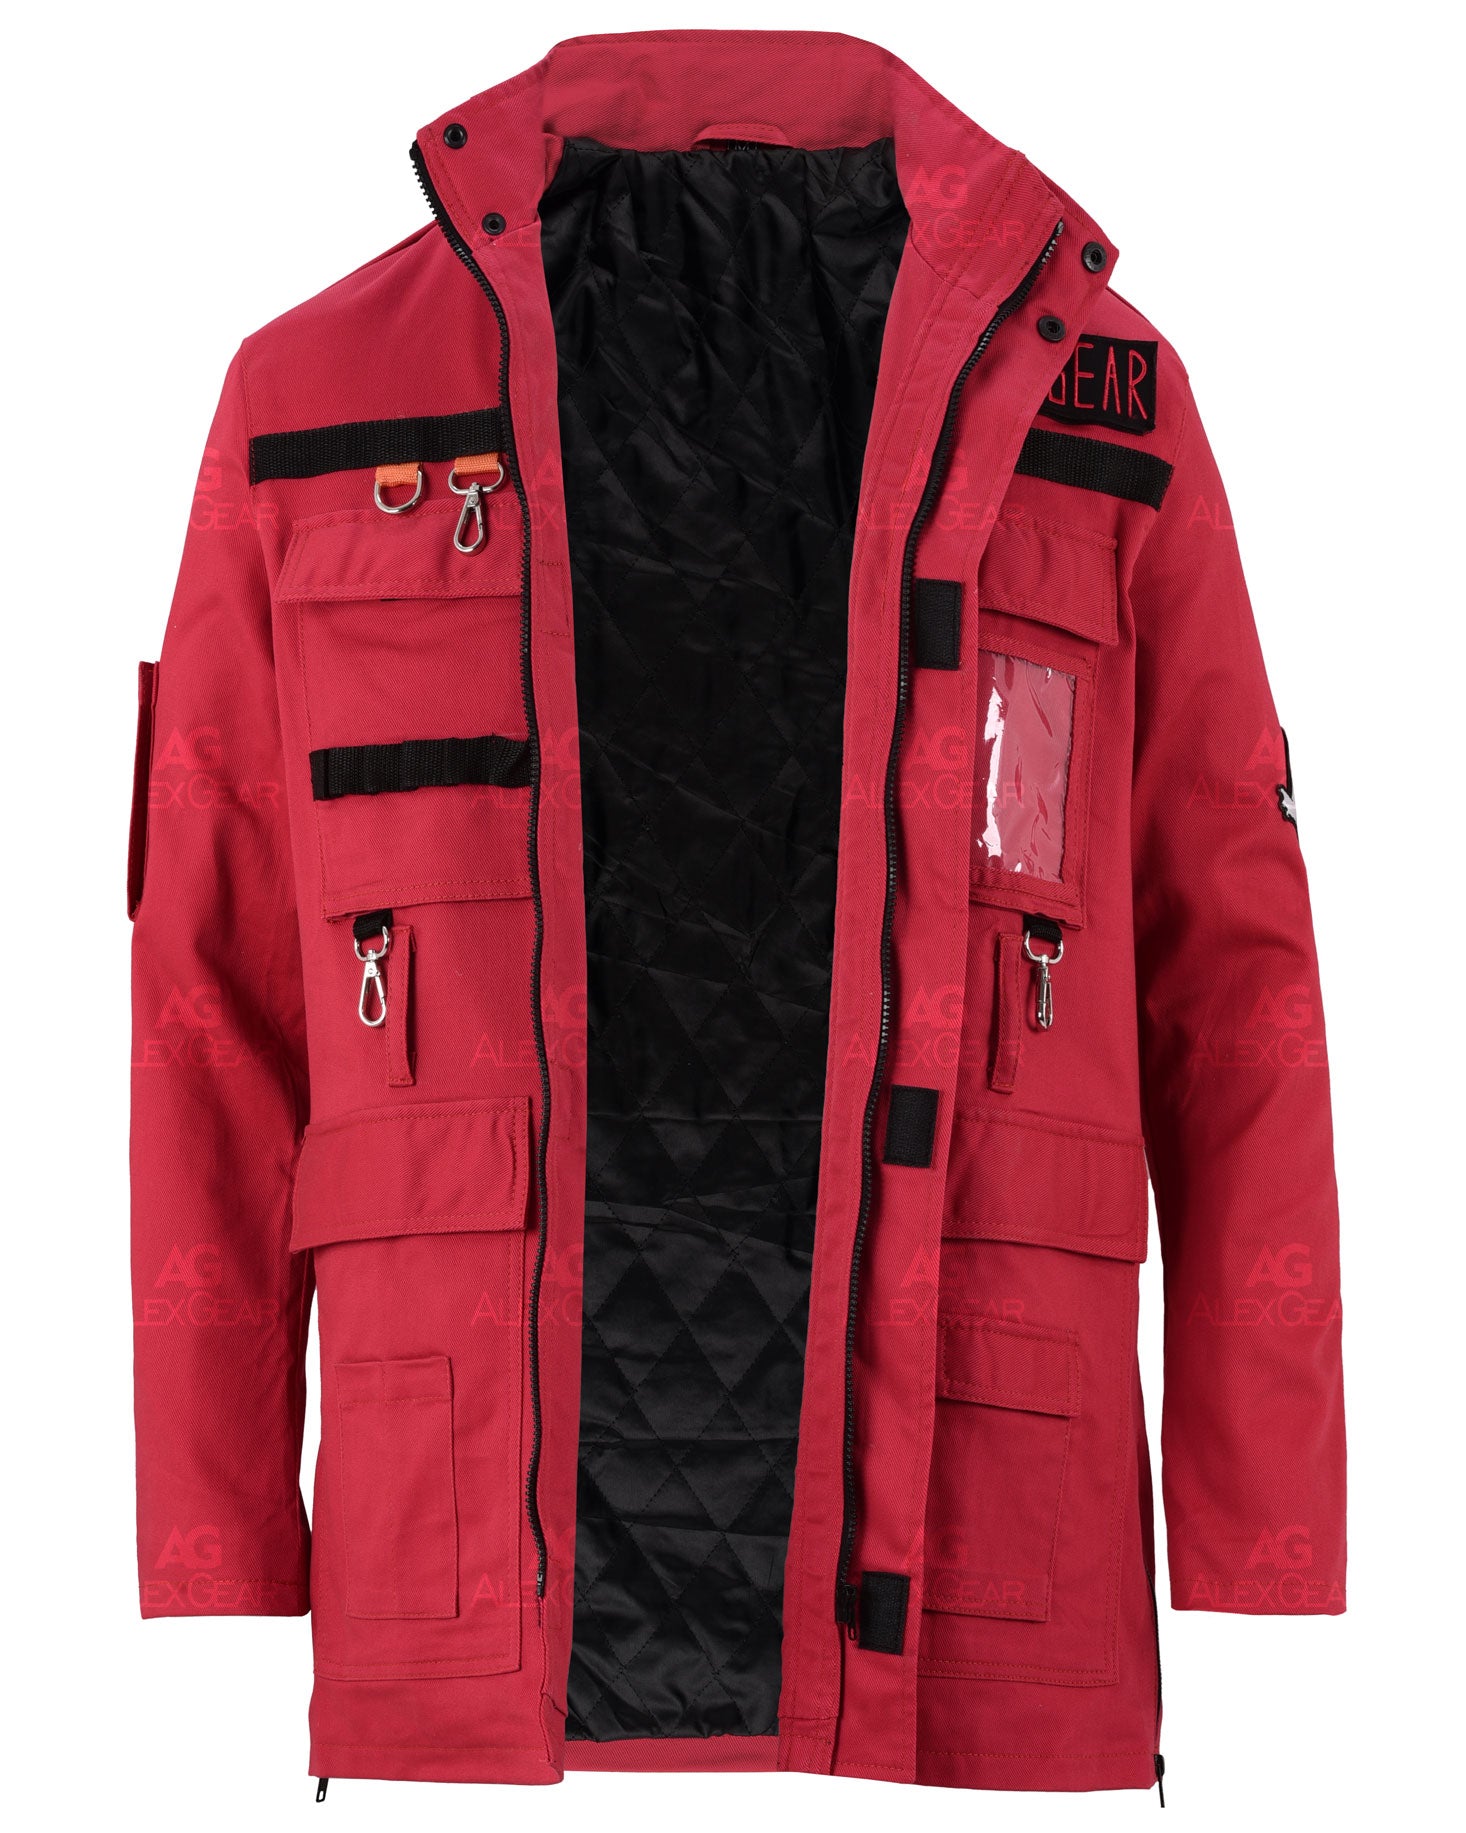 Frozen Empire Ghostbusters Red Jacket